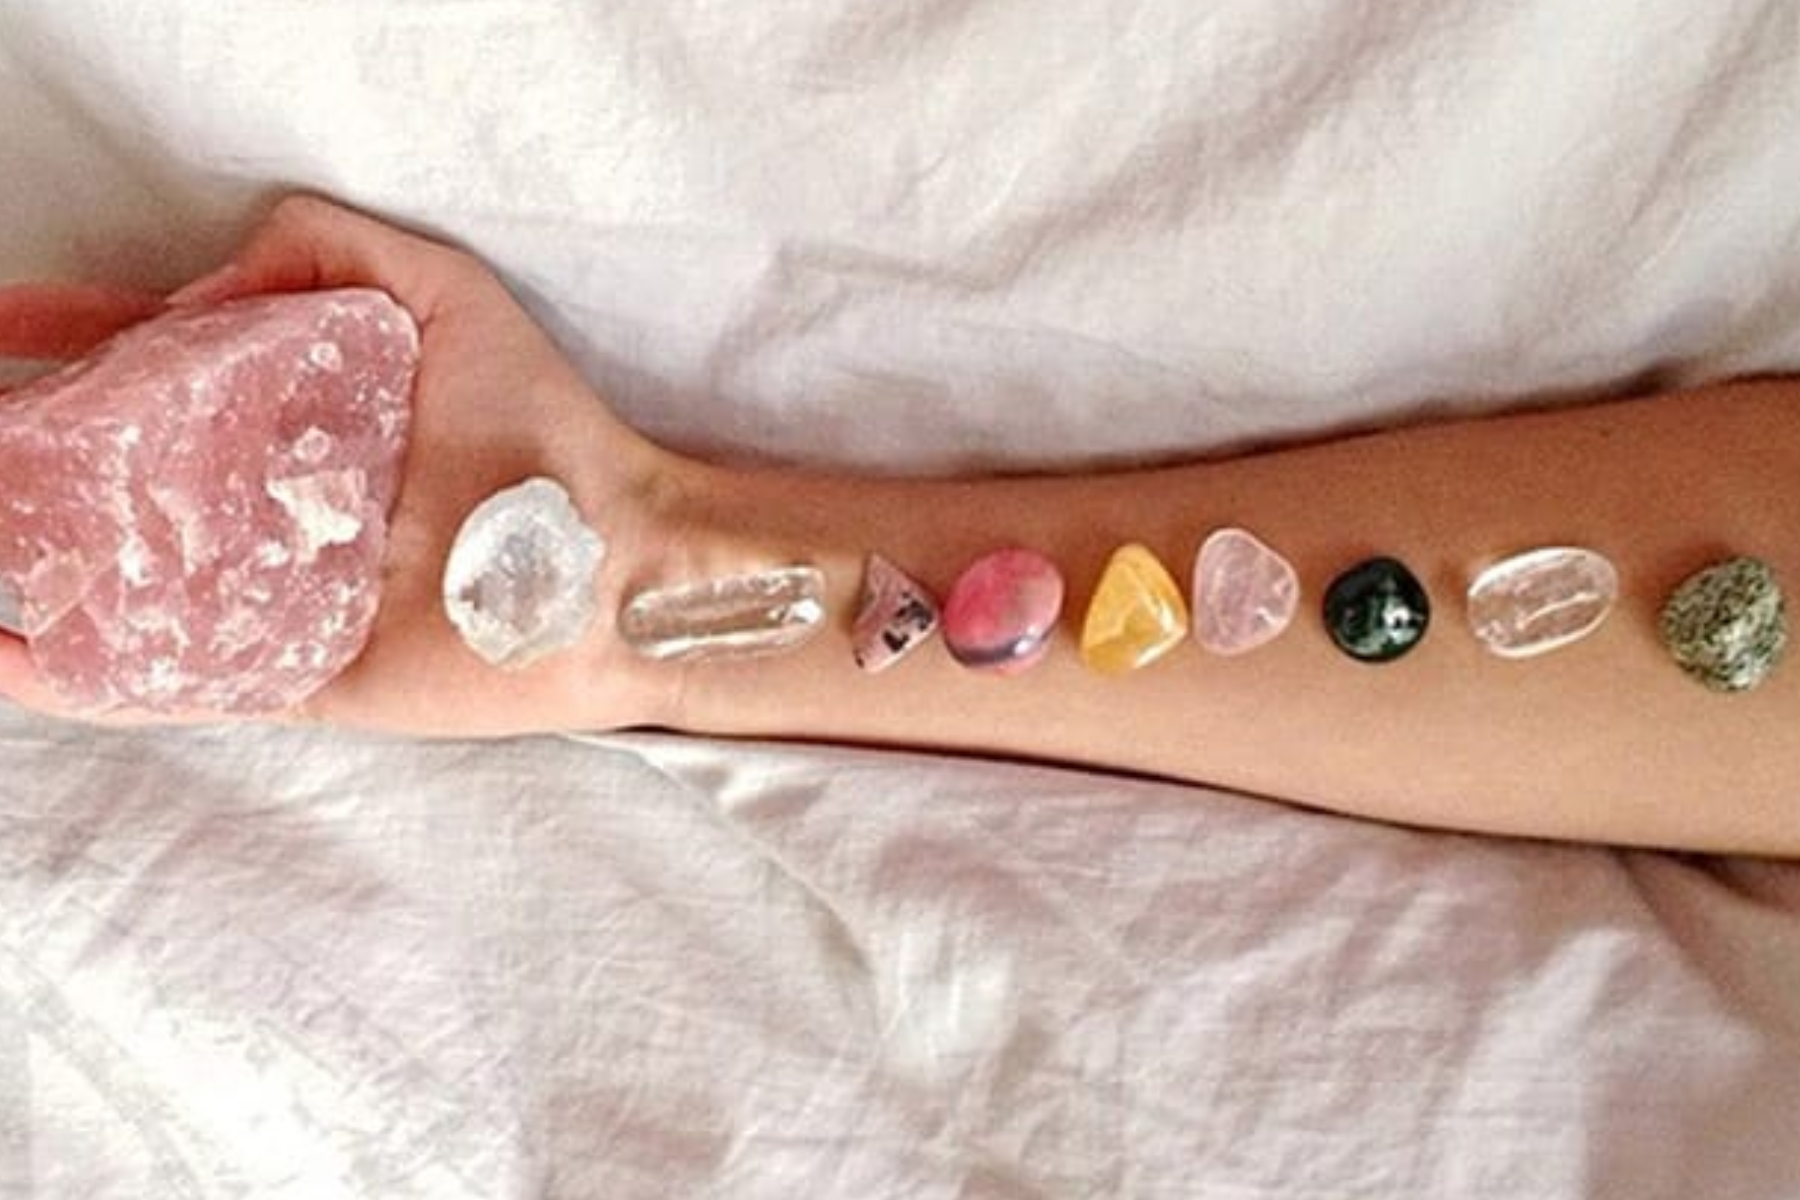 A woman's hand with several gemstones aligned